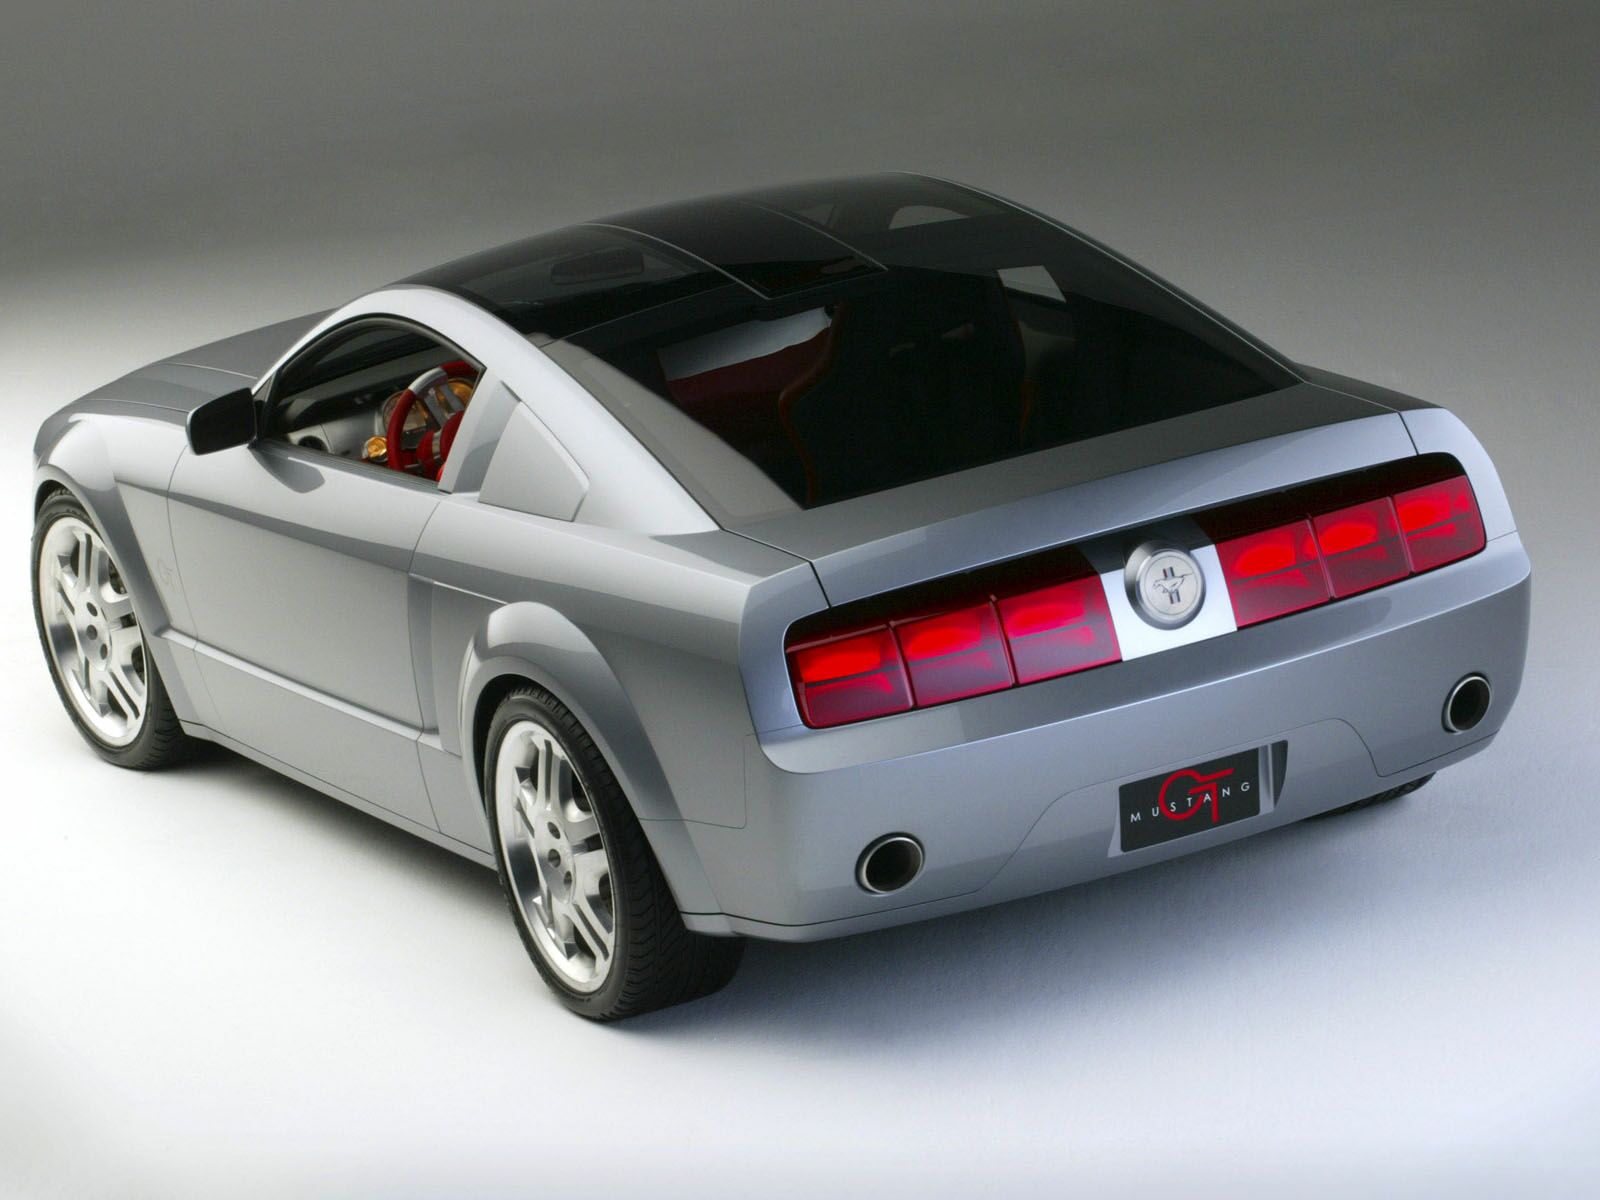 Ford_Mustang_GT_Concept_03_1600x1200.jpg